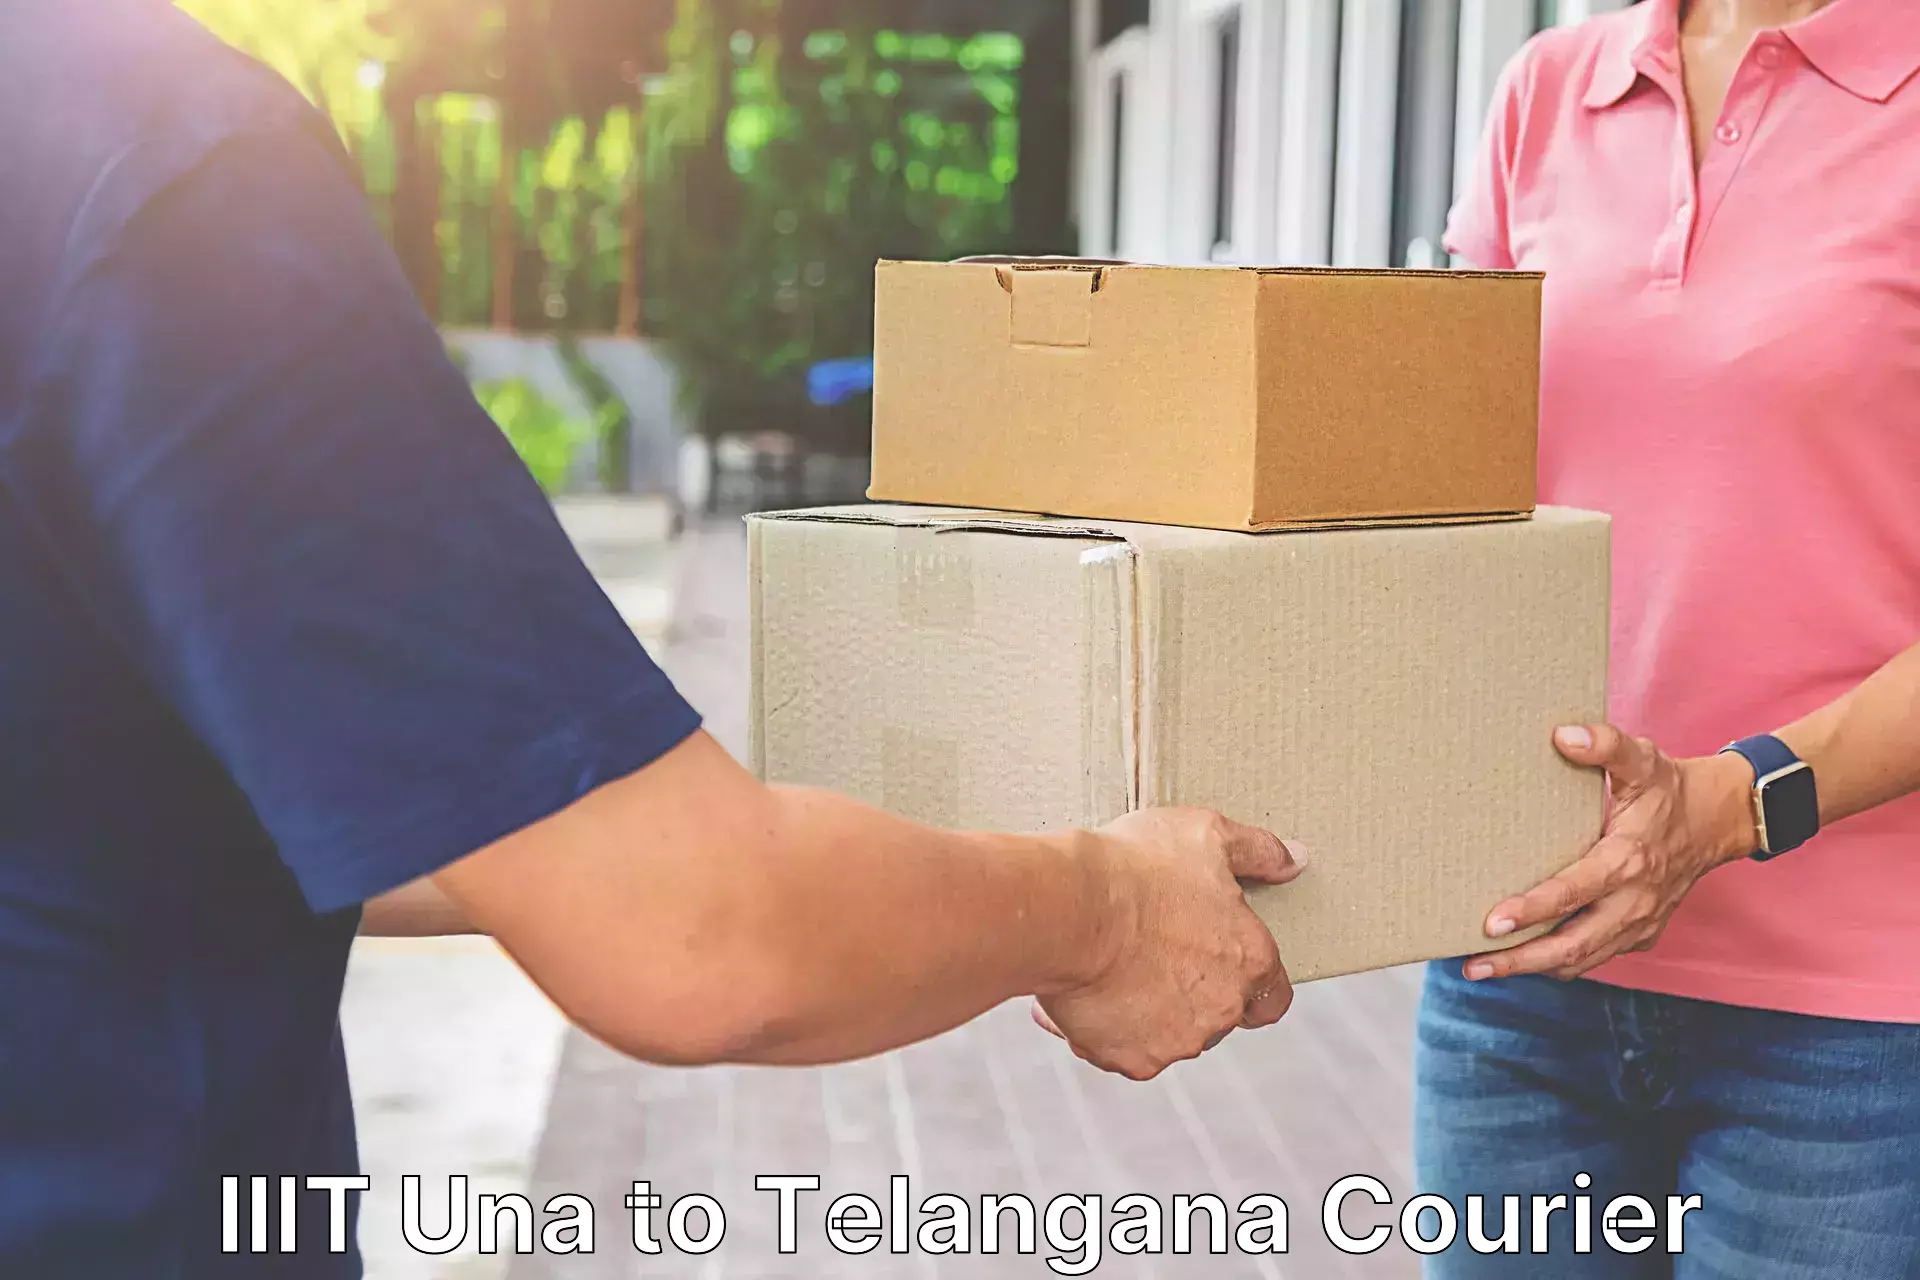 State-of-the-art courier technology IIIT Una to Pathipaka